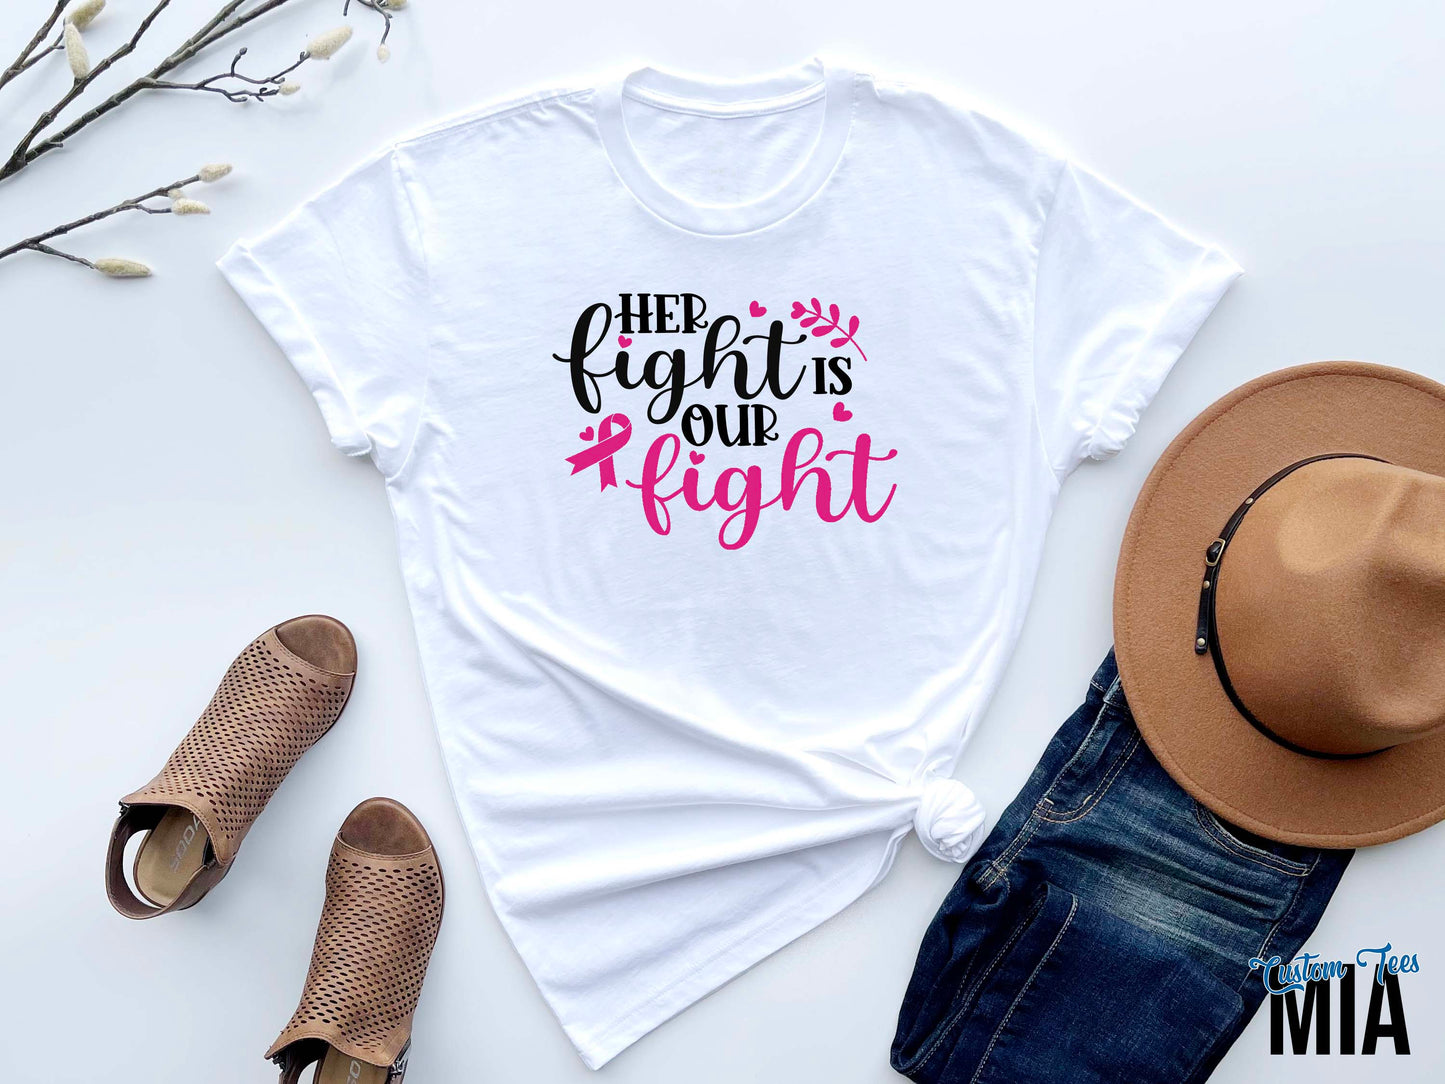 Mom and Daughter Breast Cancer Fighter Support Shirt